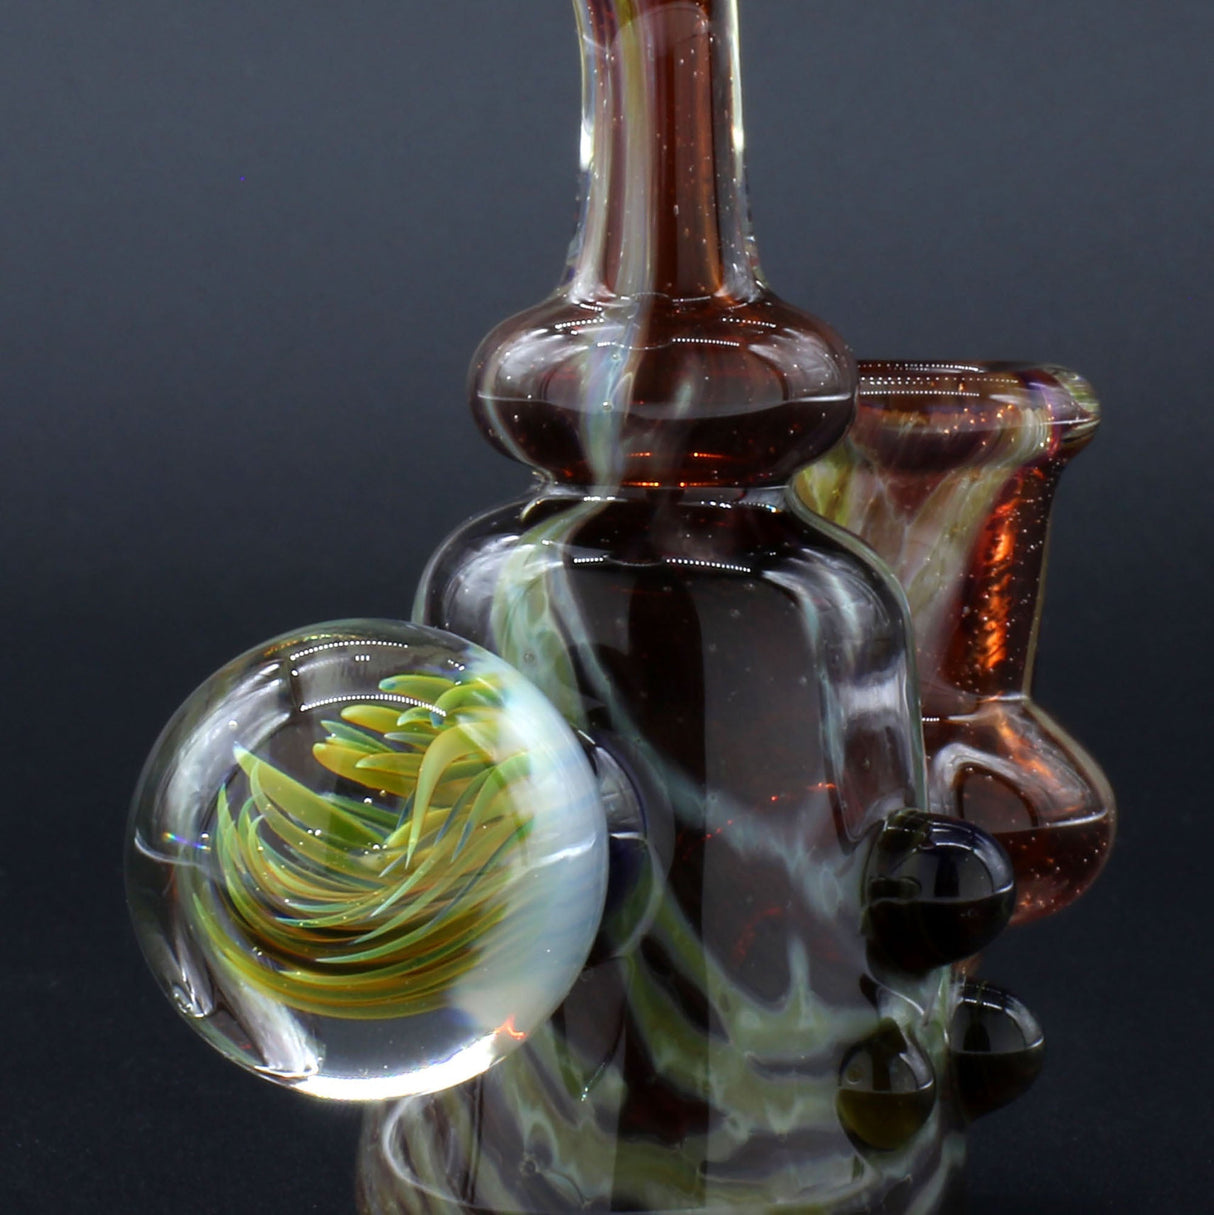 Clayball Glass "Blood Moon" Heady Sherlock Dab Rig with intricate glasswork, side view on black background